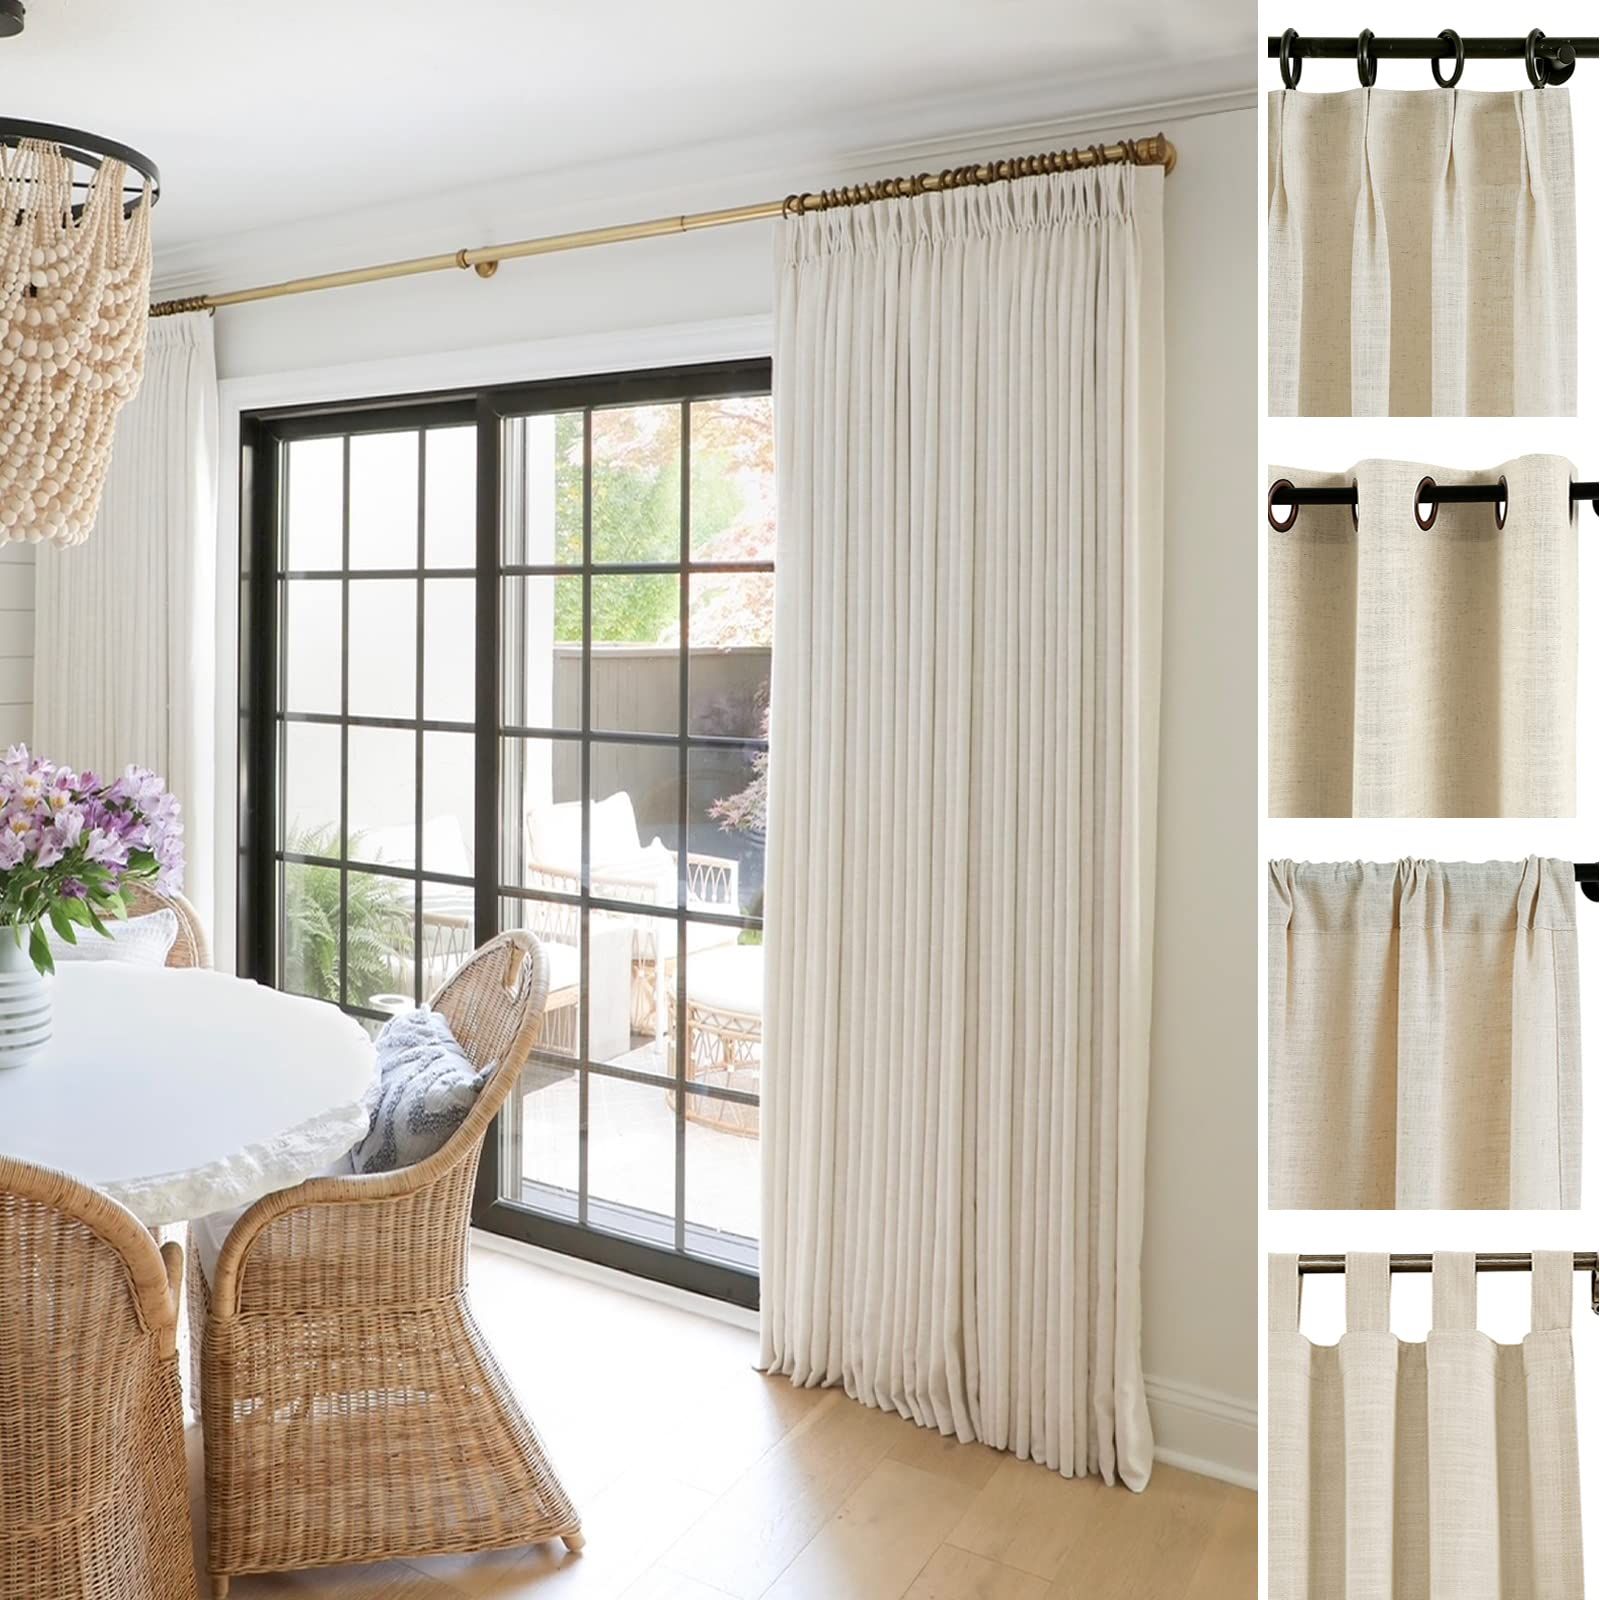 Transform Your Patio with Customized
Outdoor Curtains